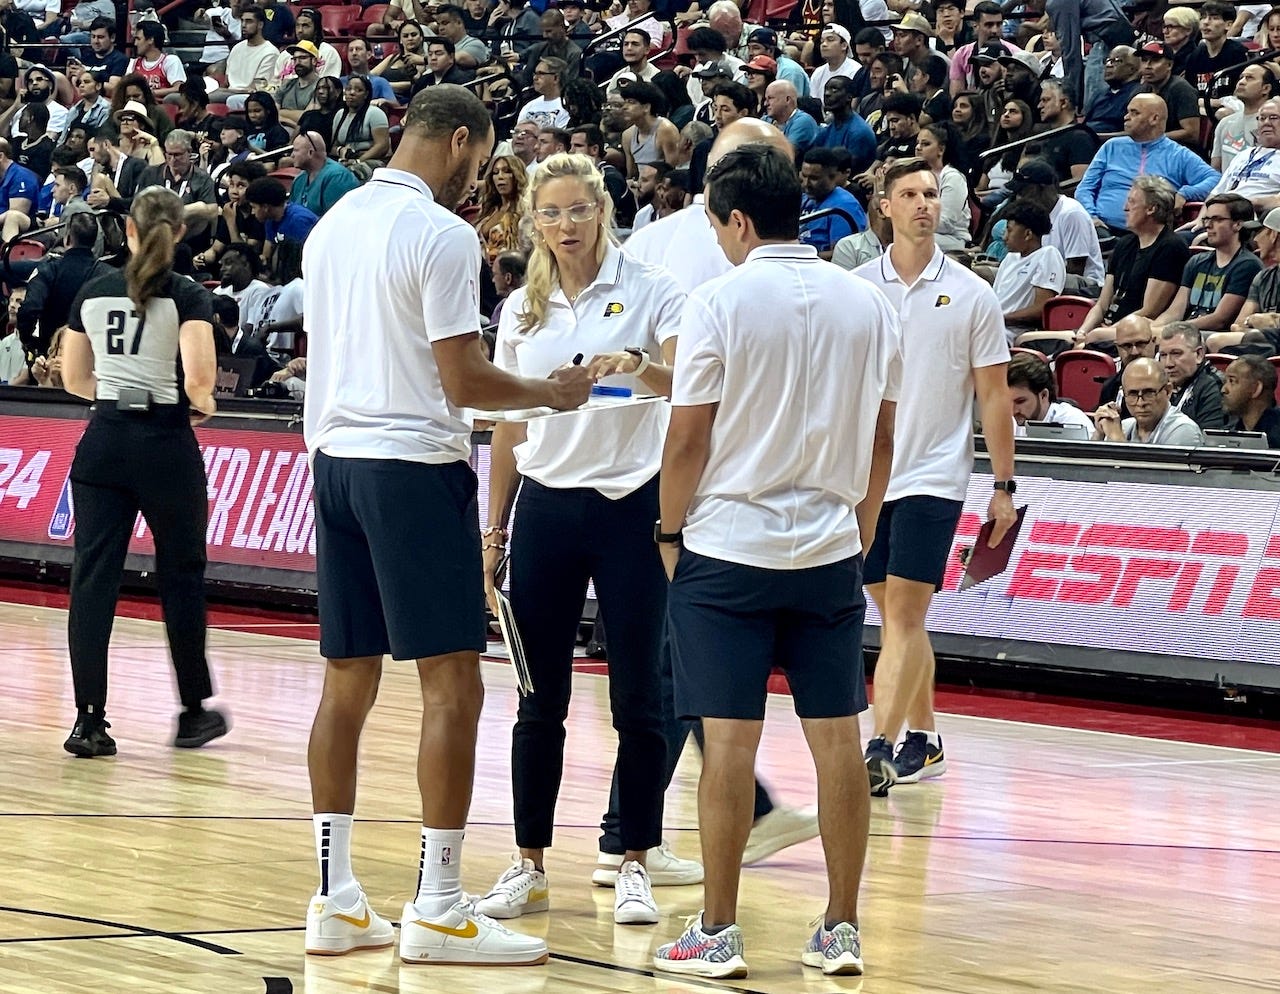 Pargo with assistants Jenny Boucek and Zach Chu during a timeout of Game 1.